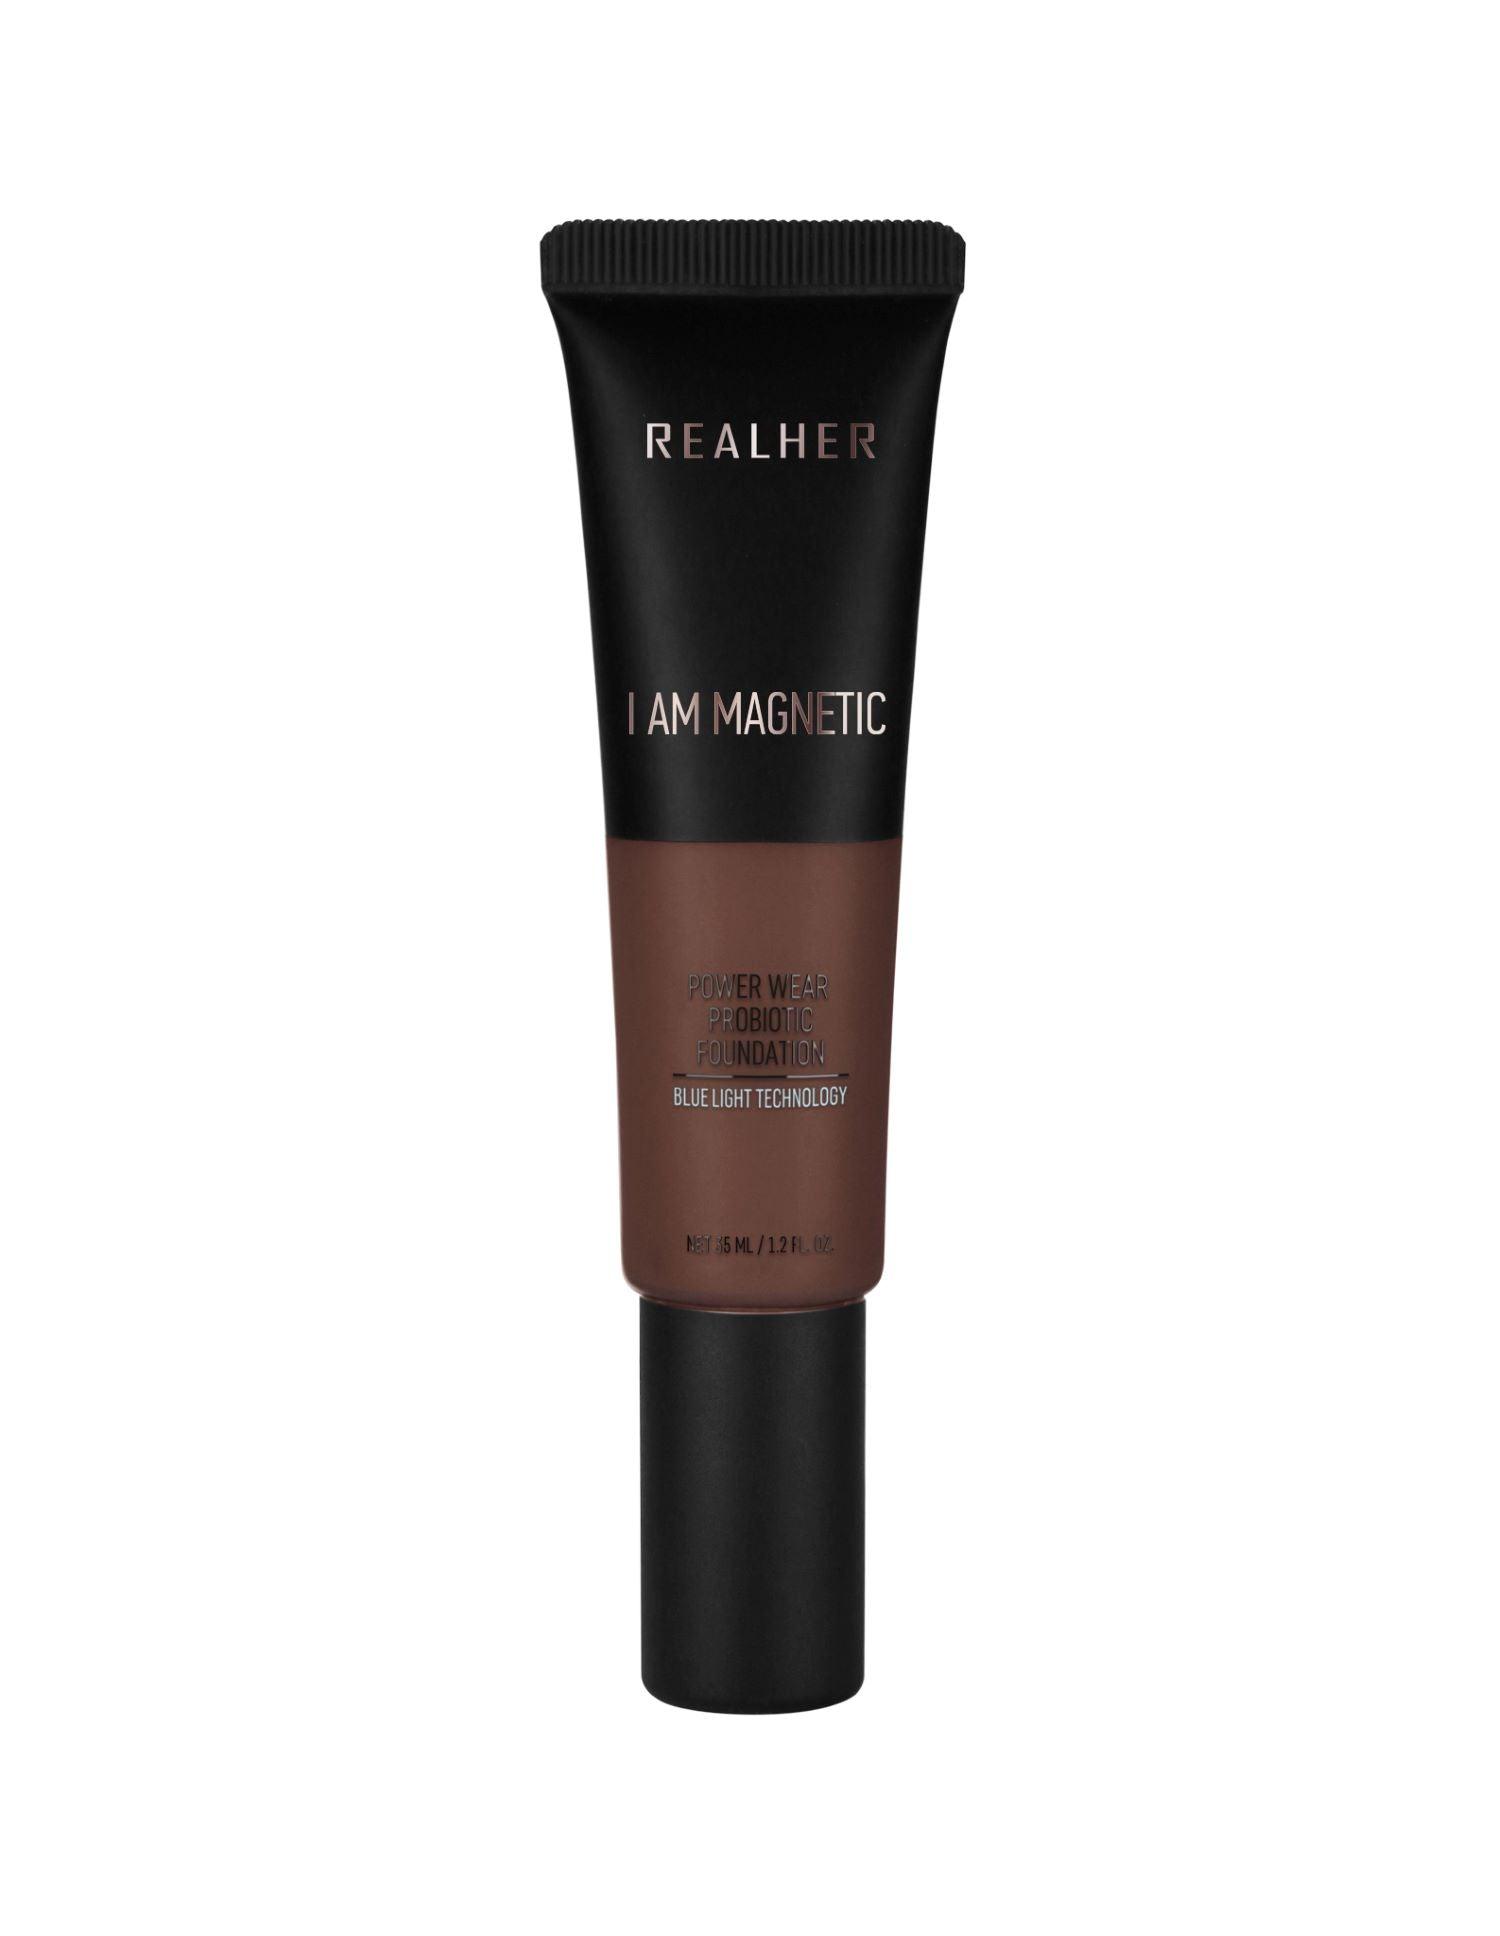 REALHER POWER WEAR LIQUID FOUNDATION- I AM MAGNETIC - Beauty Ethic